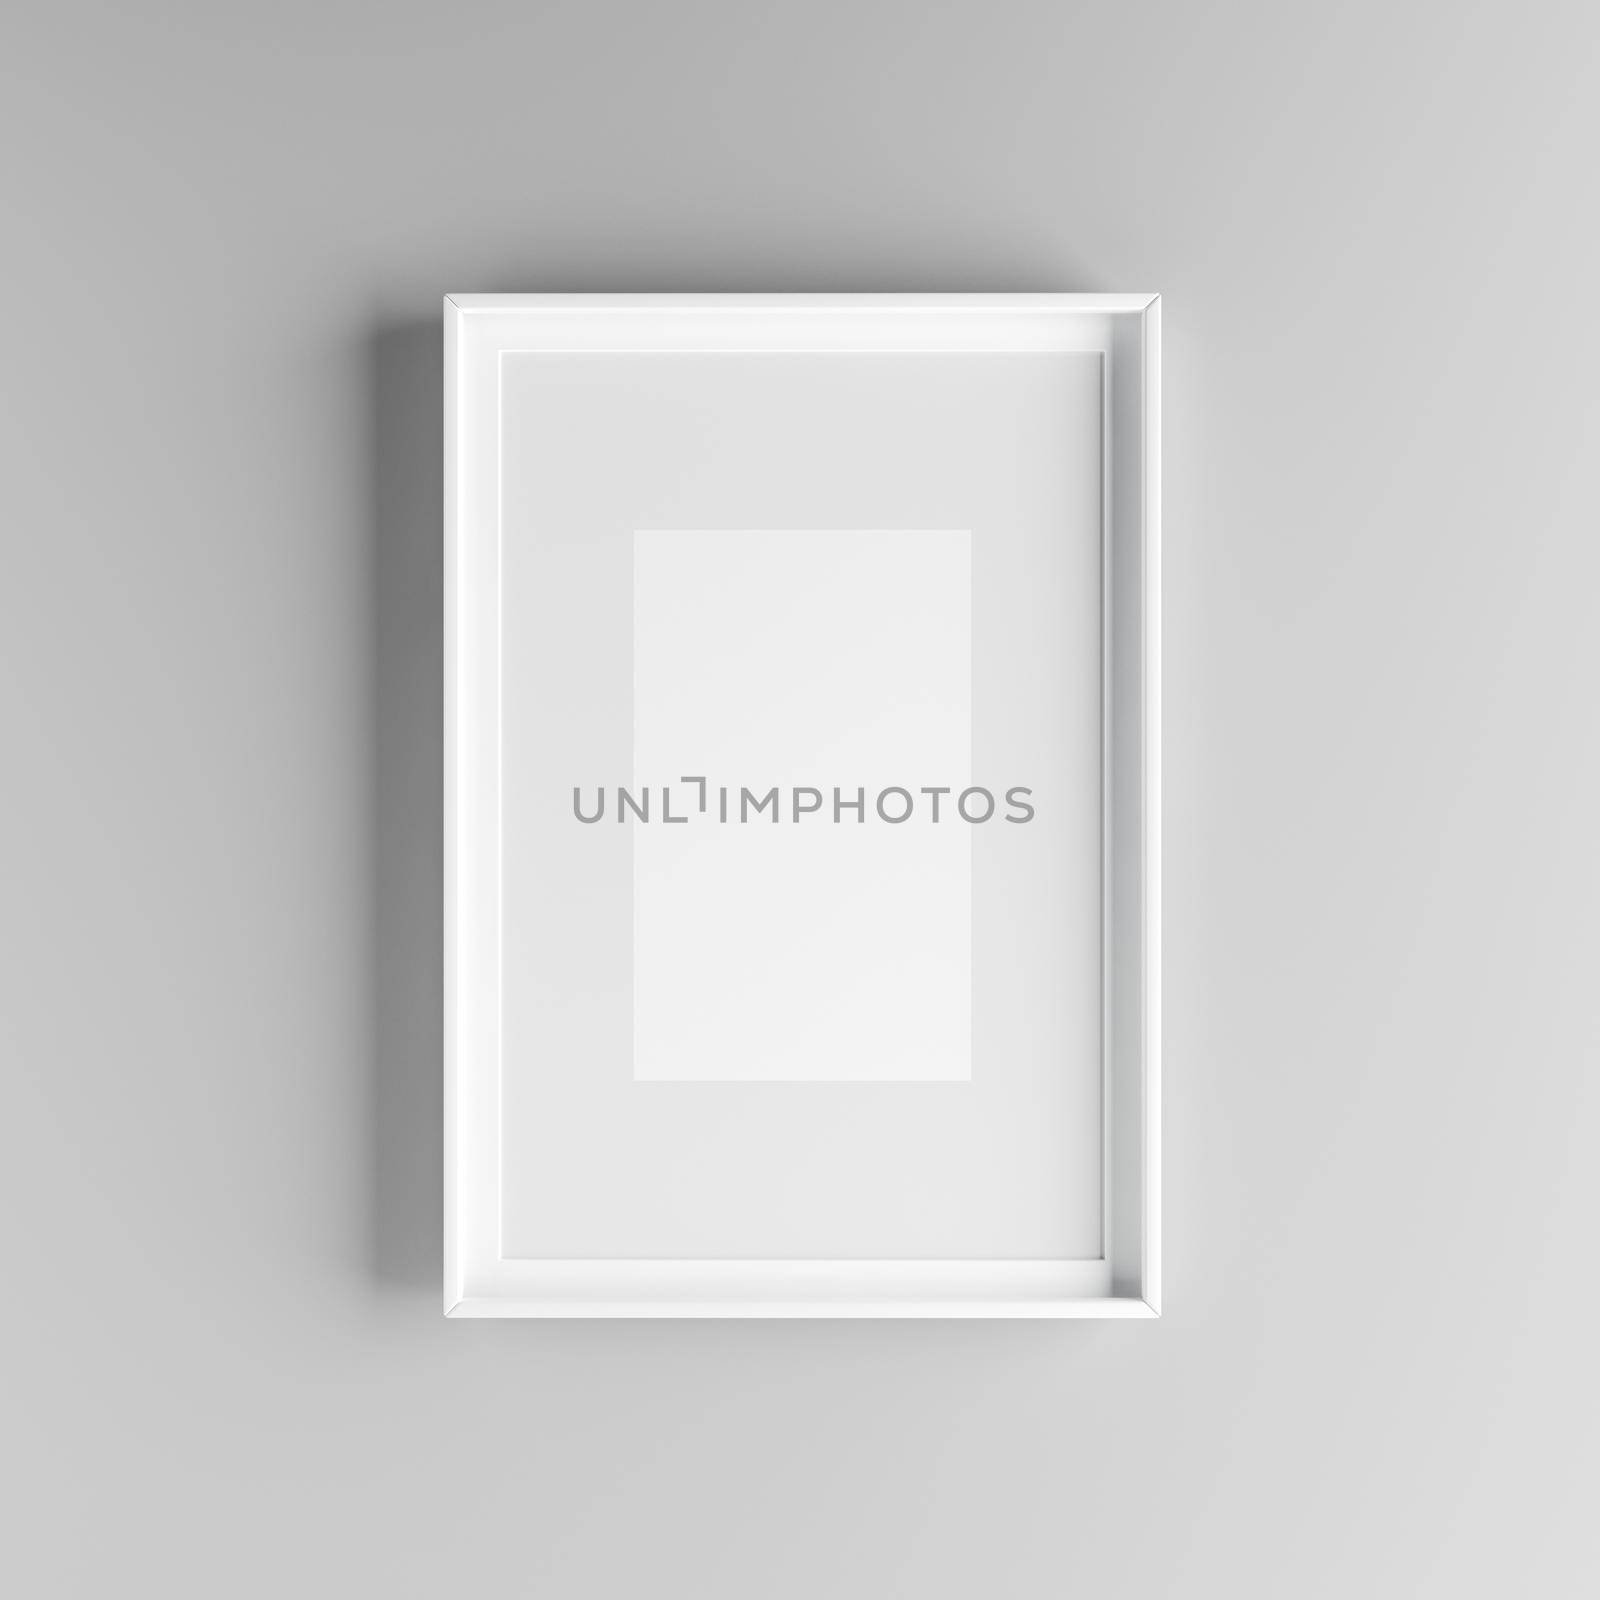 Elegant and minimalistic picture frame with parspartu standing on gray wall. Design element. 3D render